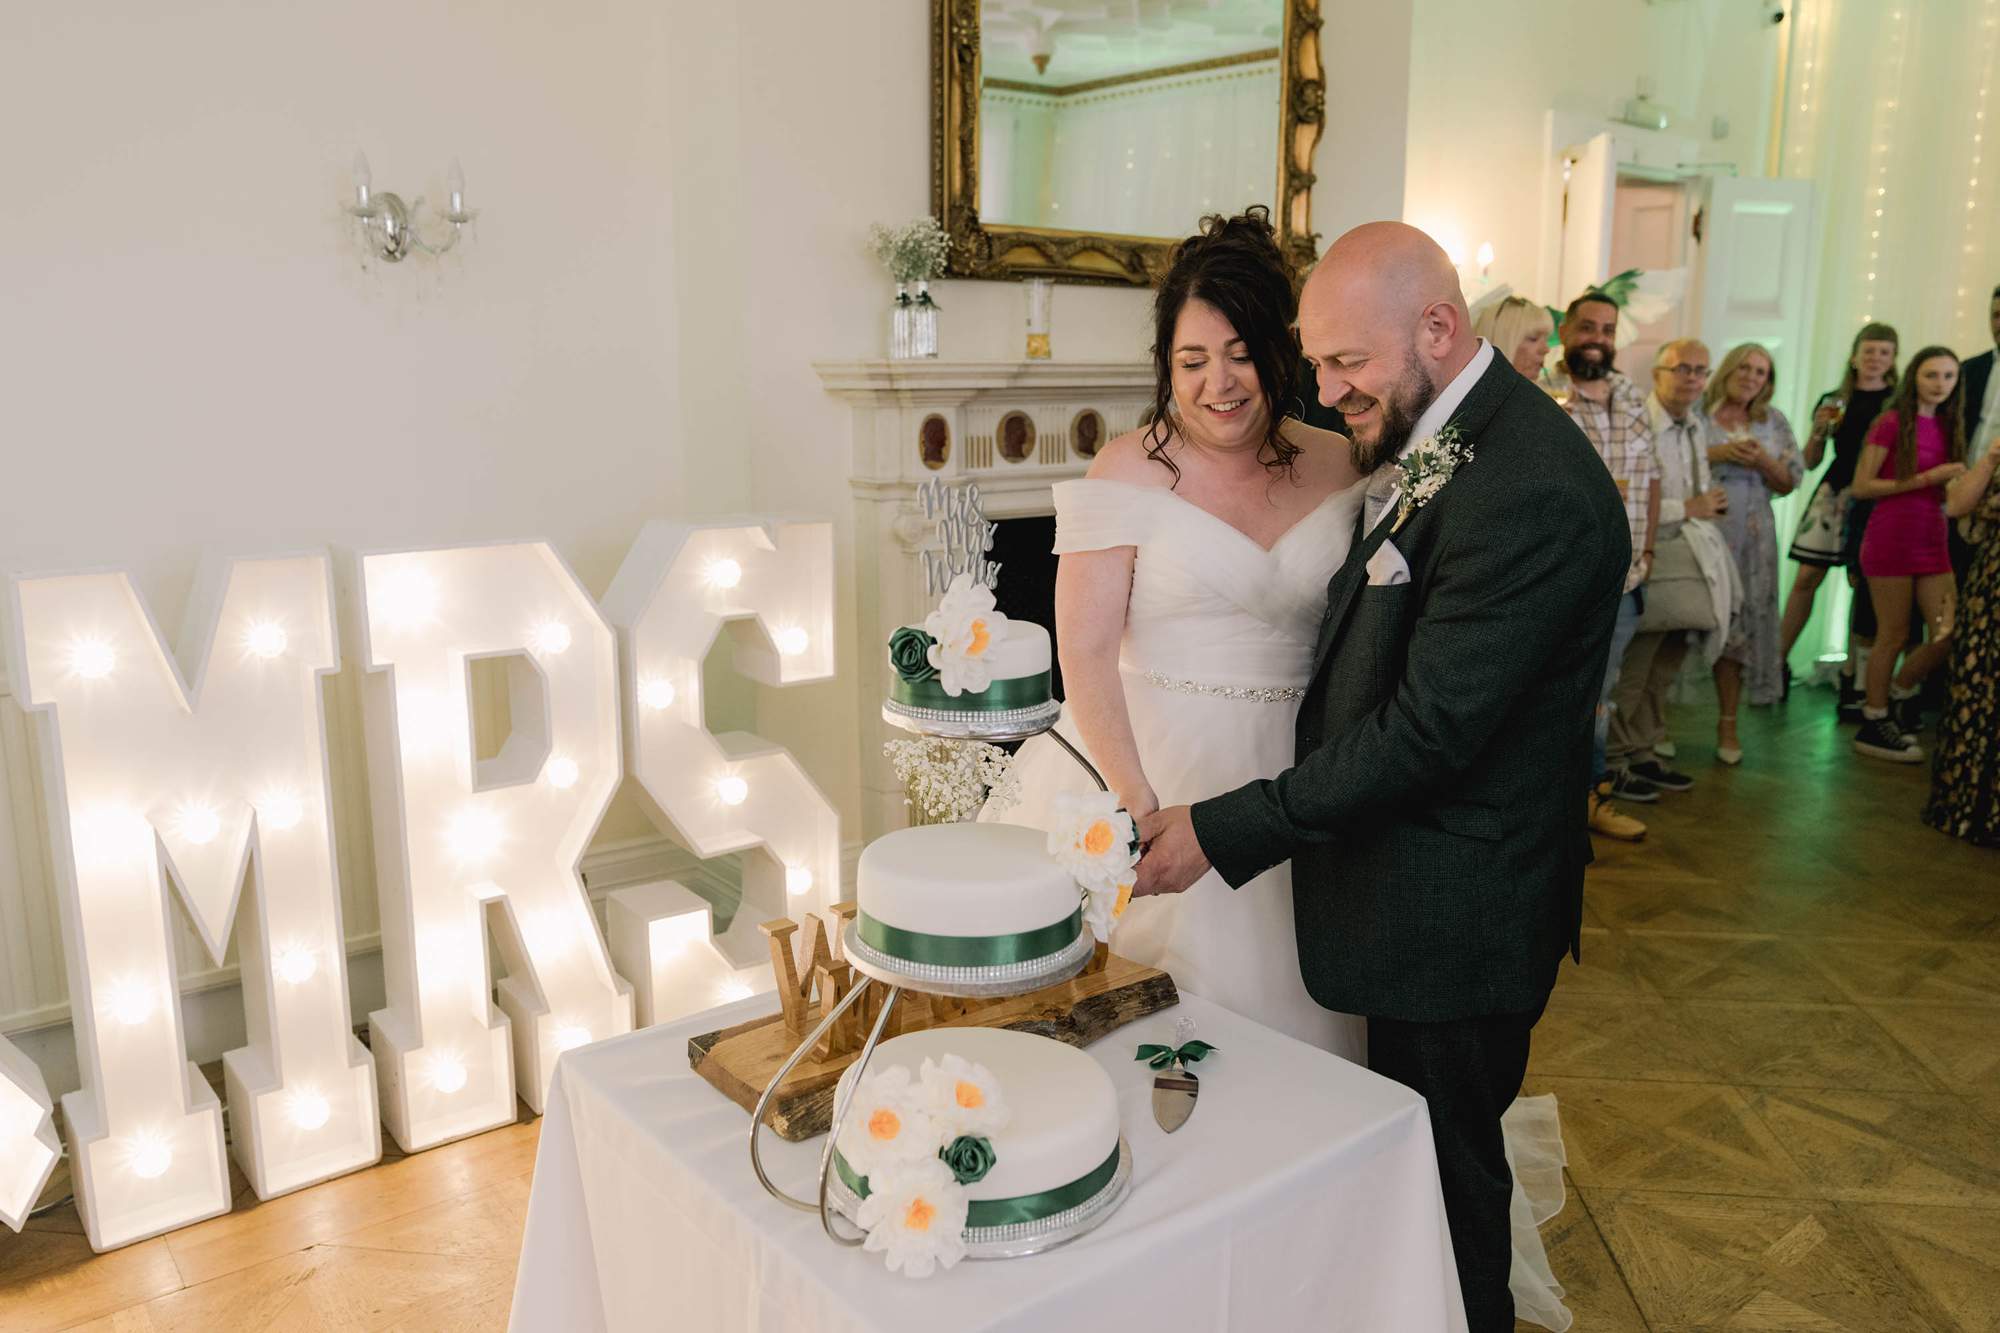 Bride and groom cut the cake at Highley Manor wedding reception.